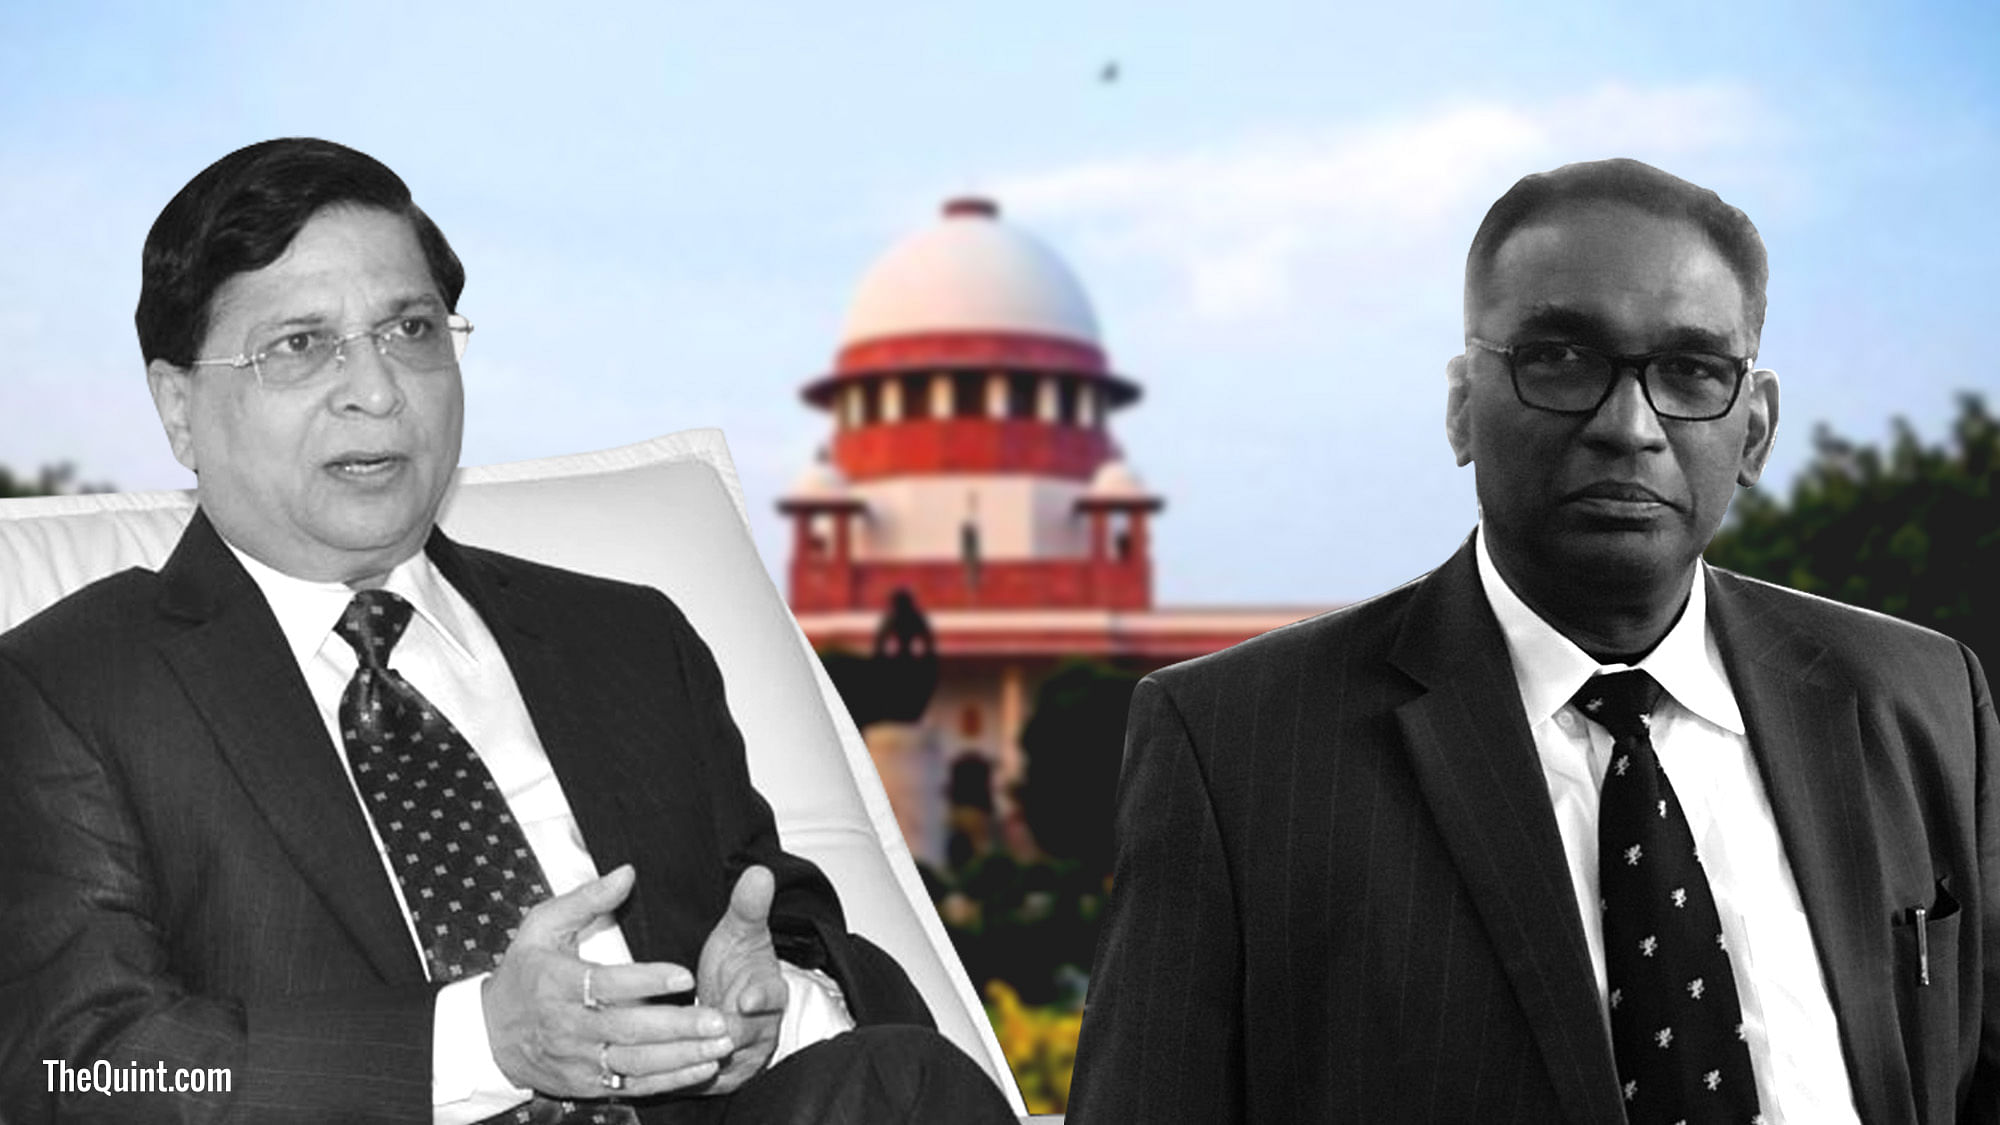 CJI Dipak Misra (left) took exception to an order passed by a bench including Justice Chelameshwar (right) that set up a Constitution Bench to look into allegations of bribery in the judiciary